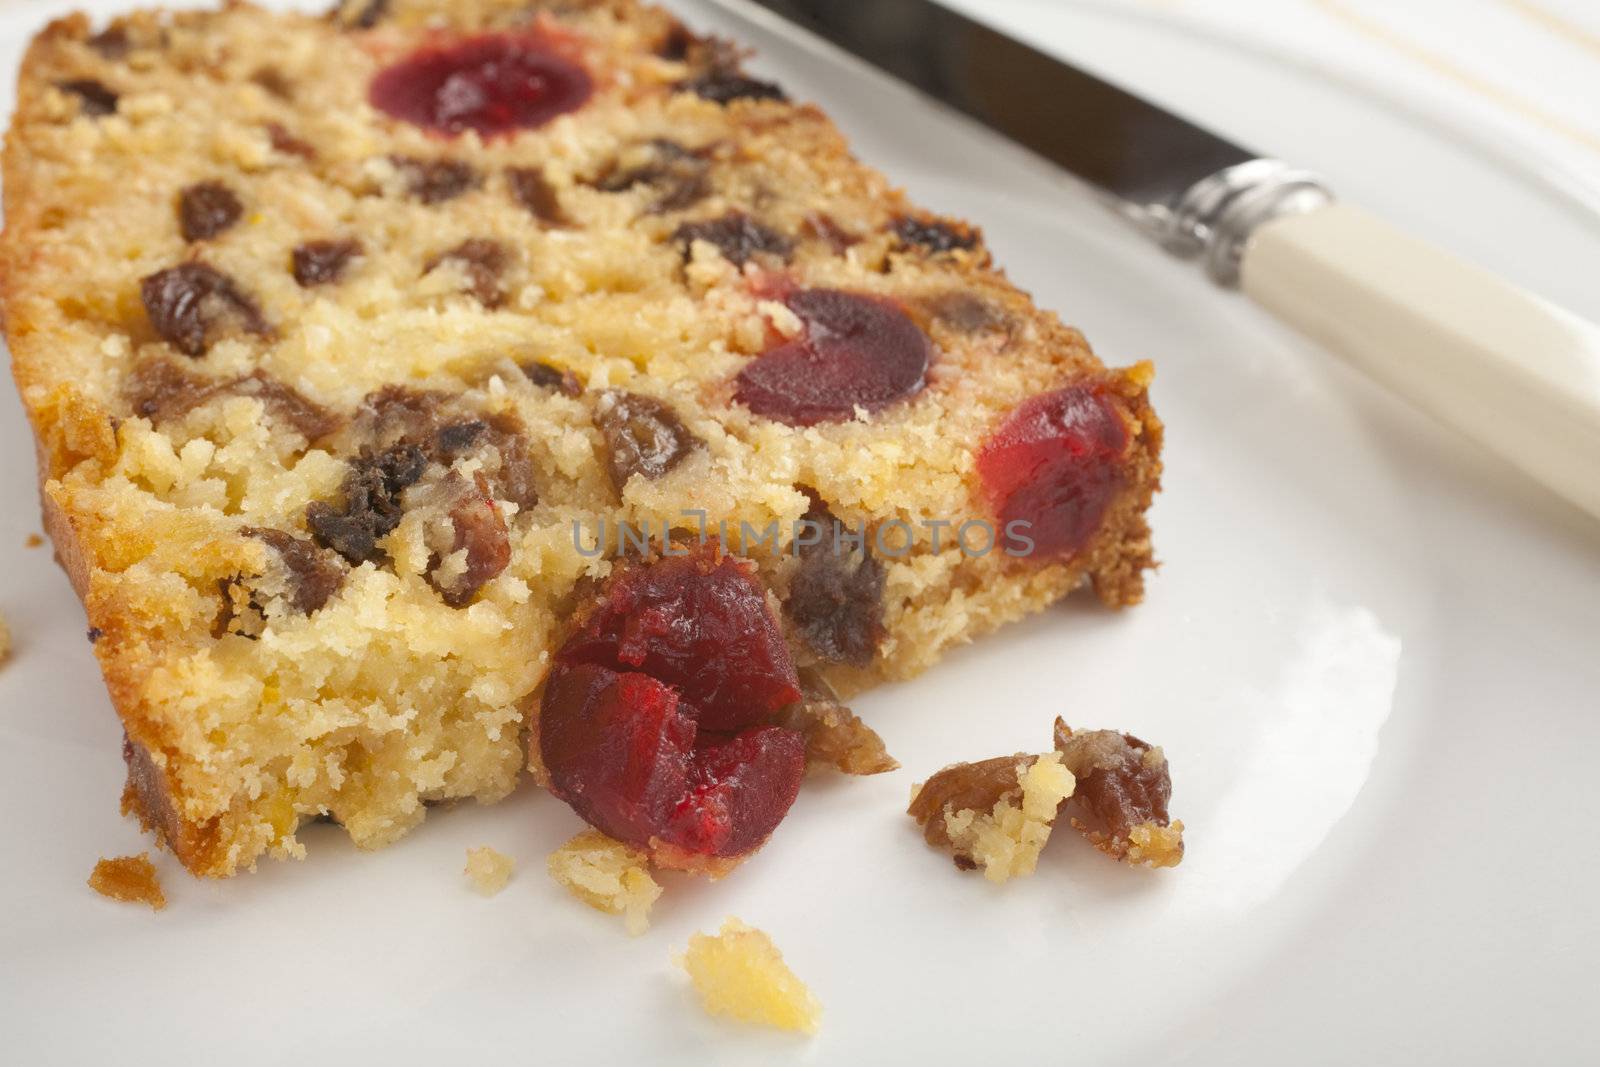 A slice of deliciously moist coconut fruit cake, stuffed with goodies like coconut, cherries, lemon and sultanas.